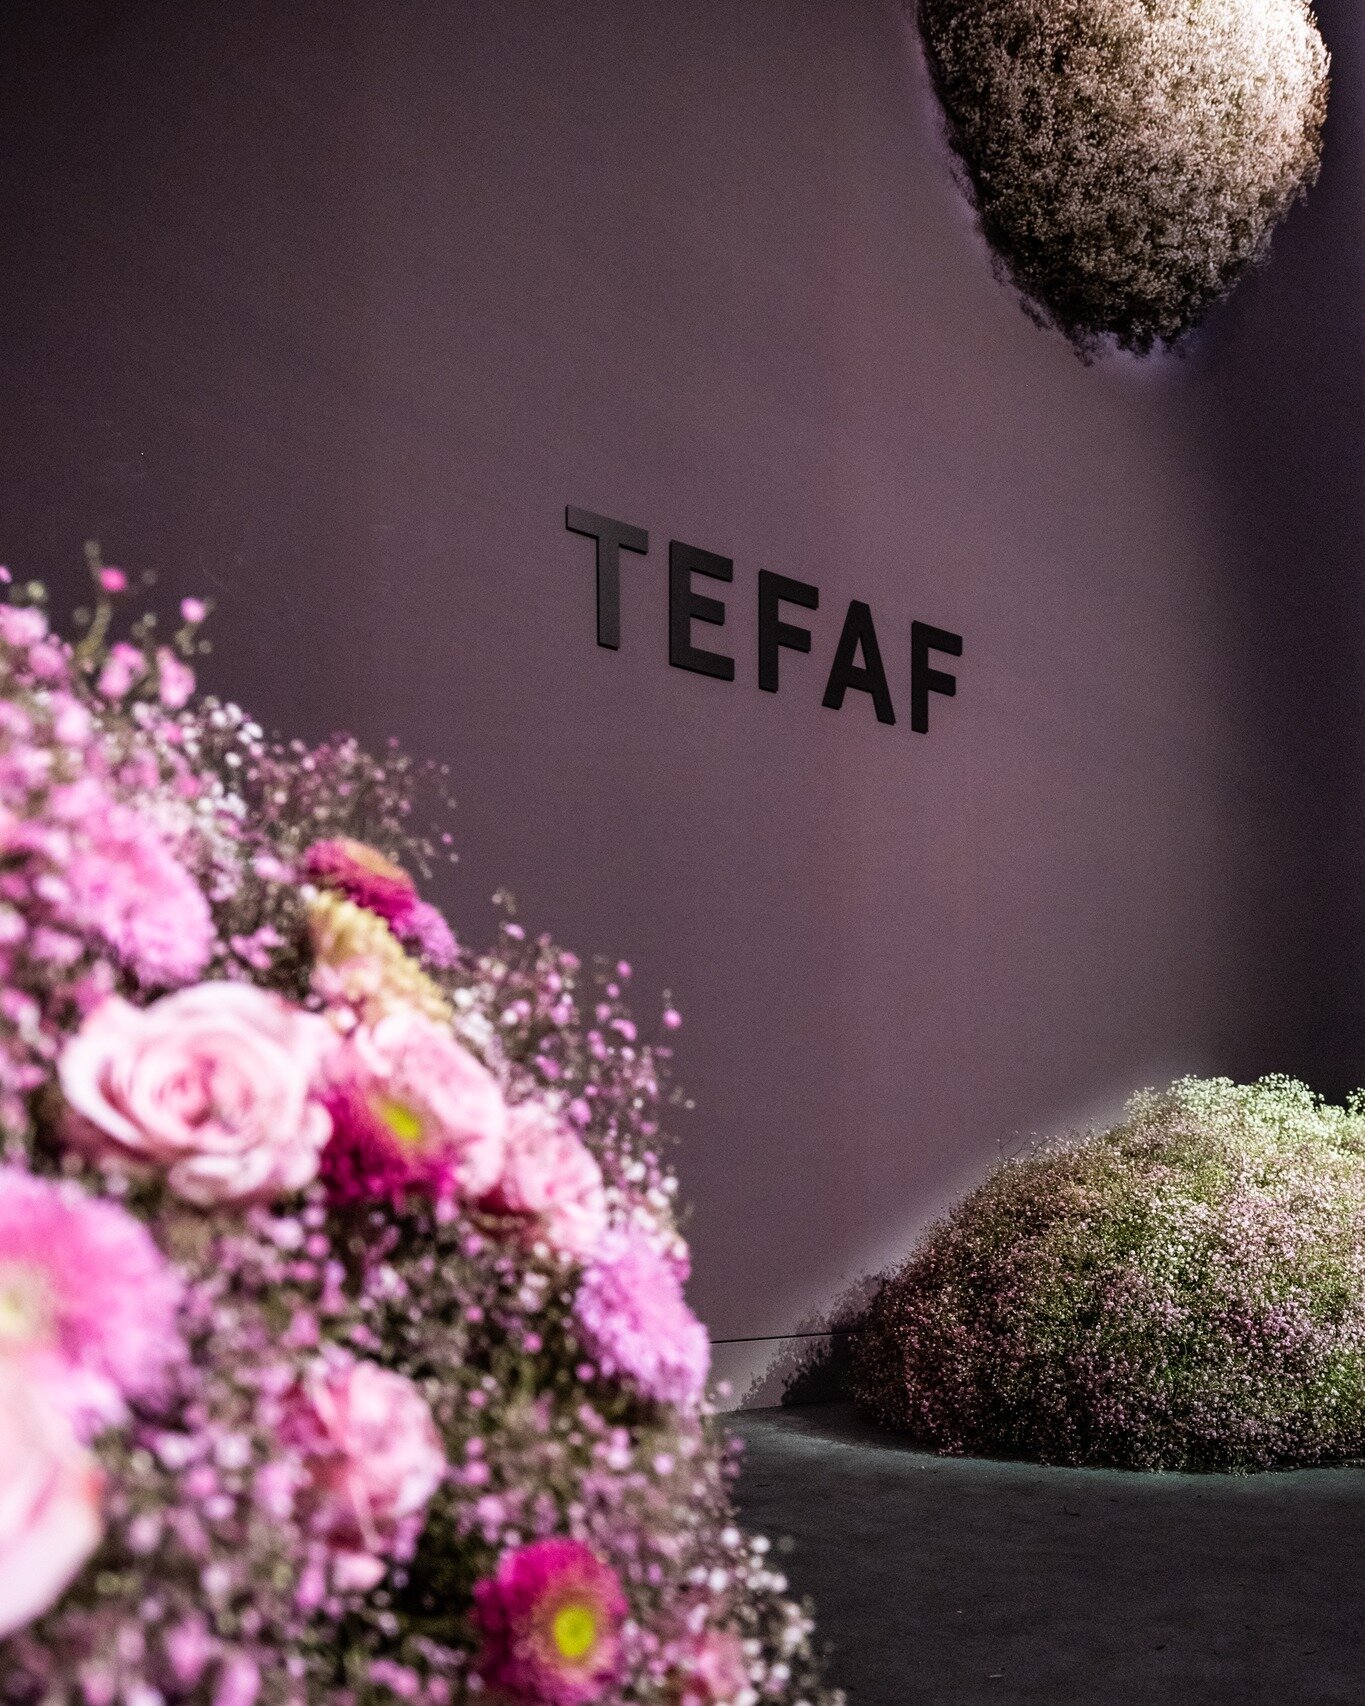 Thrilled to share the news - I'm back with the @TEFAF photography team for the fourth time! 📸✨ Excited to capture the magic of this incredible art fair once again. 
.
My favorite moments? When people engage with the artwork. Each shot feels like a c